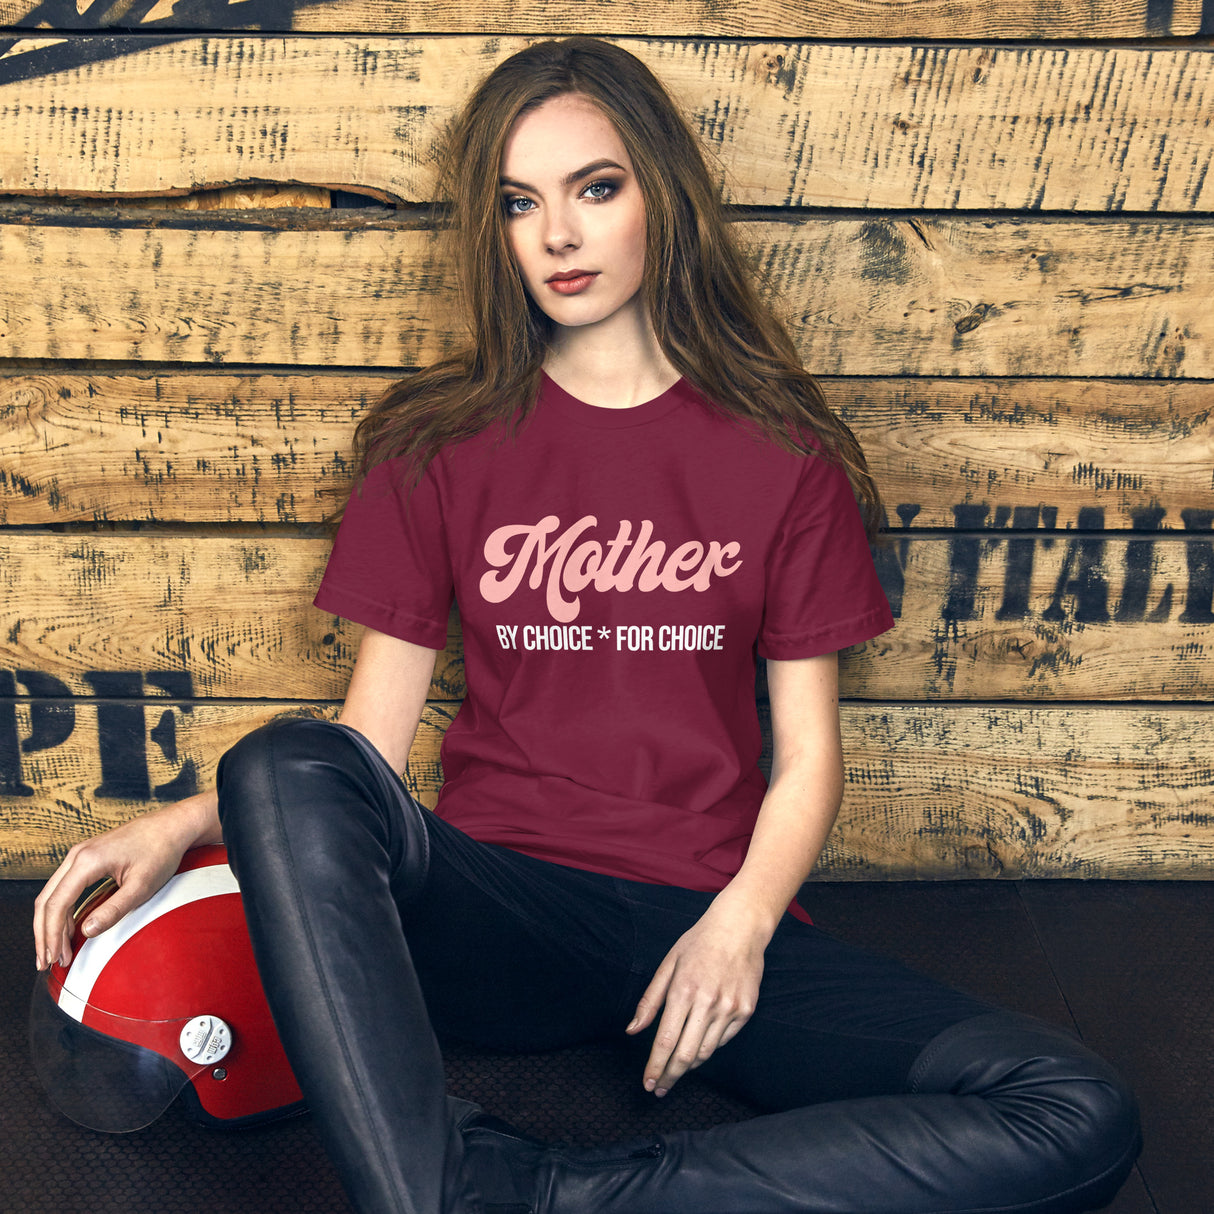 Mother By Choice For Choice Women's Shirt